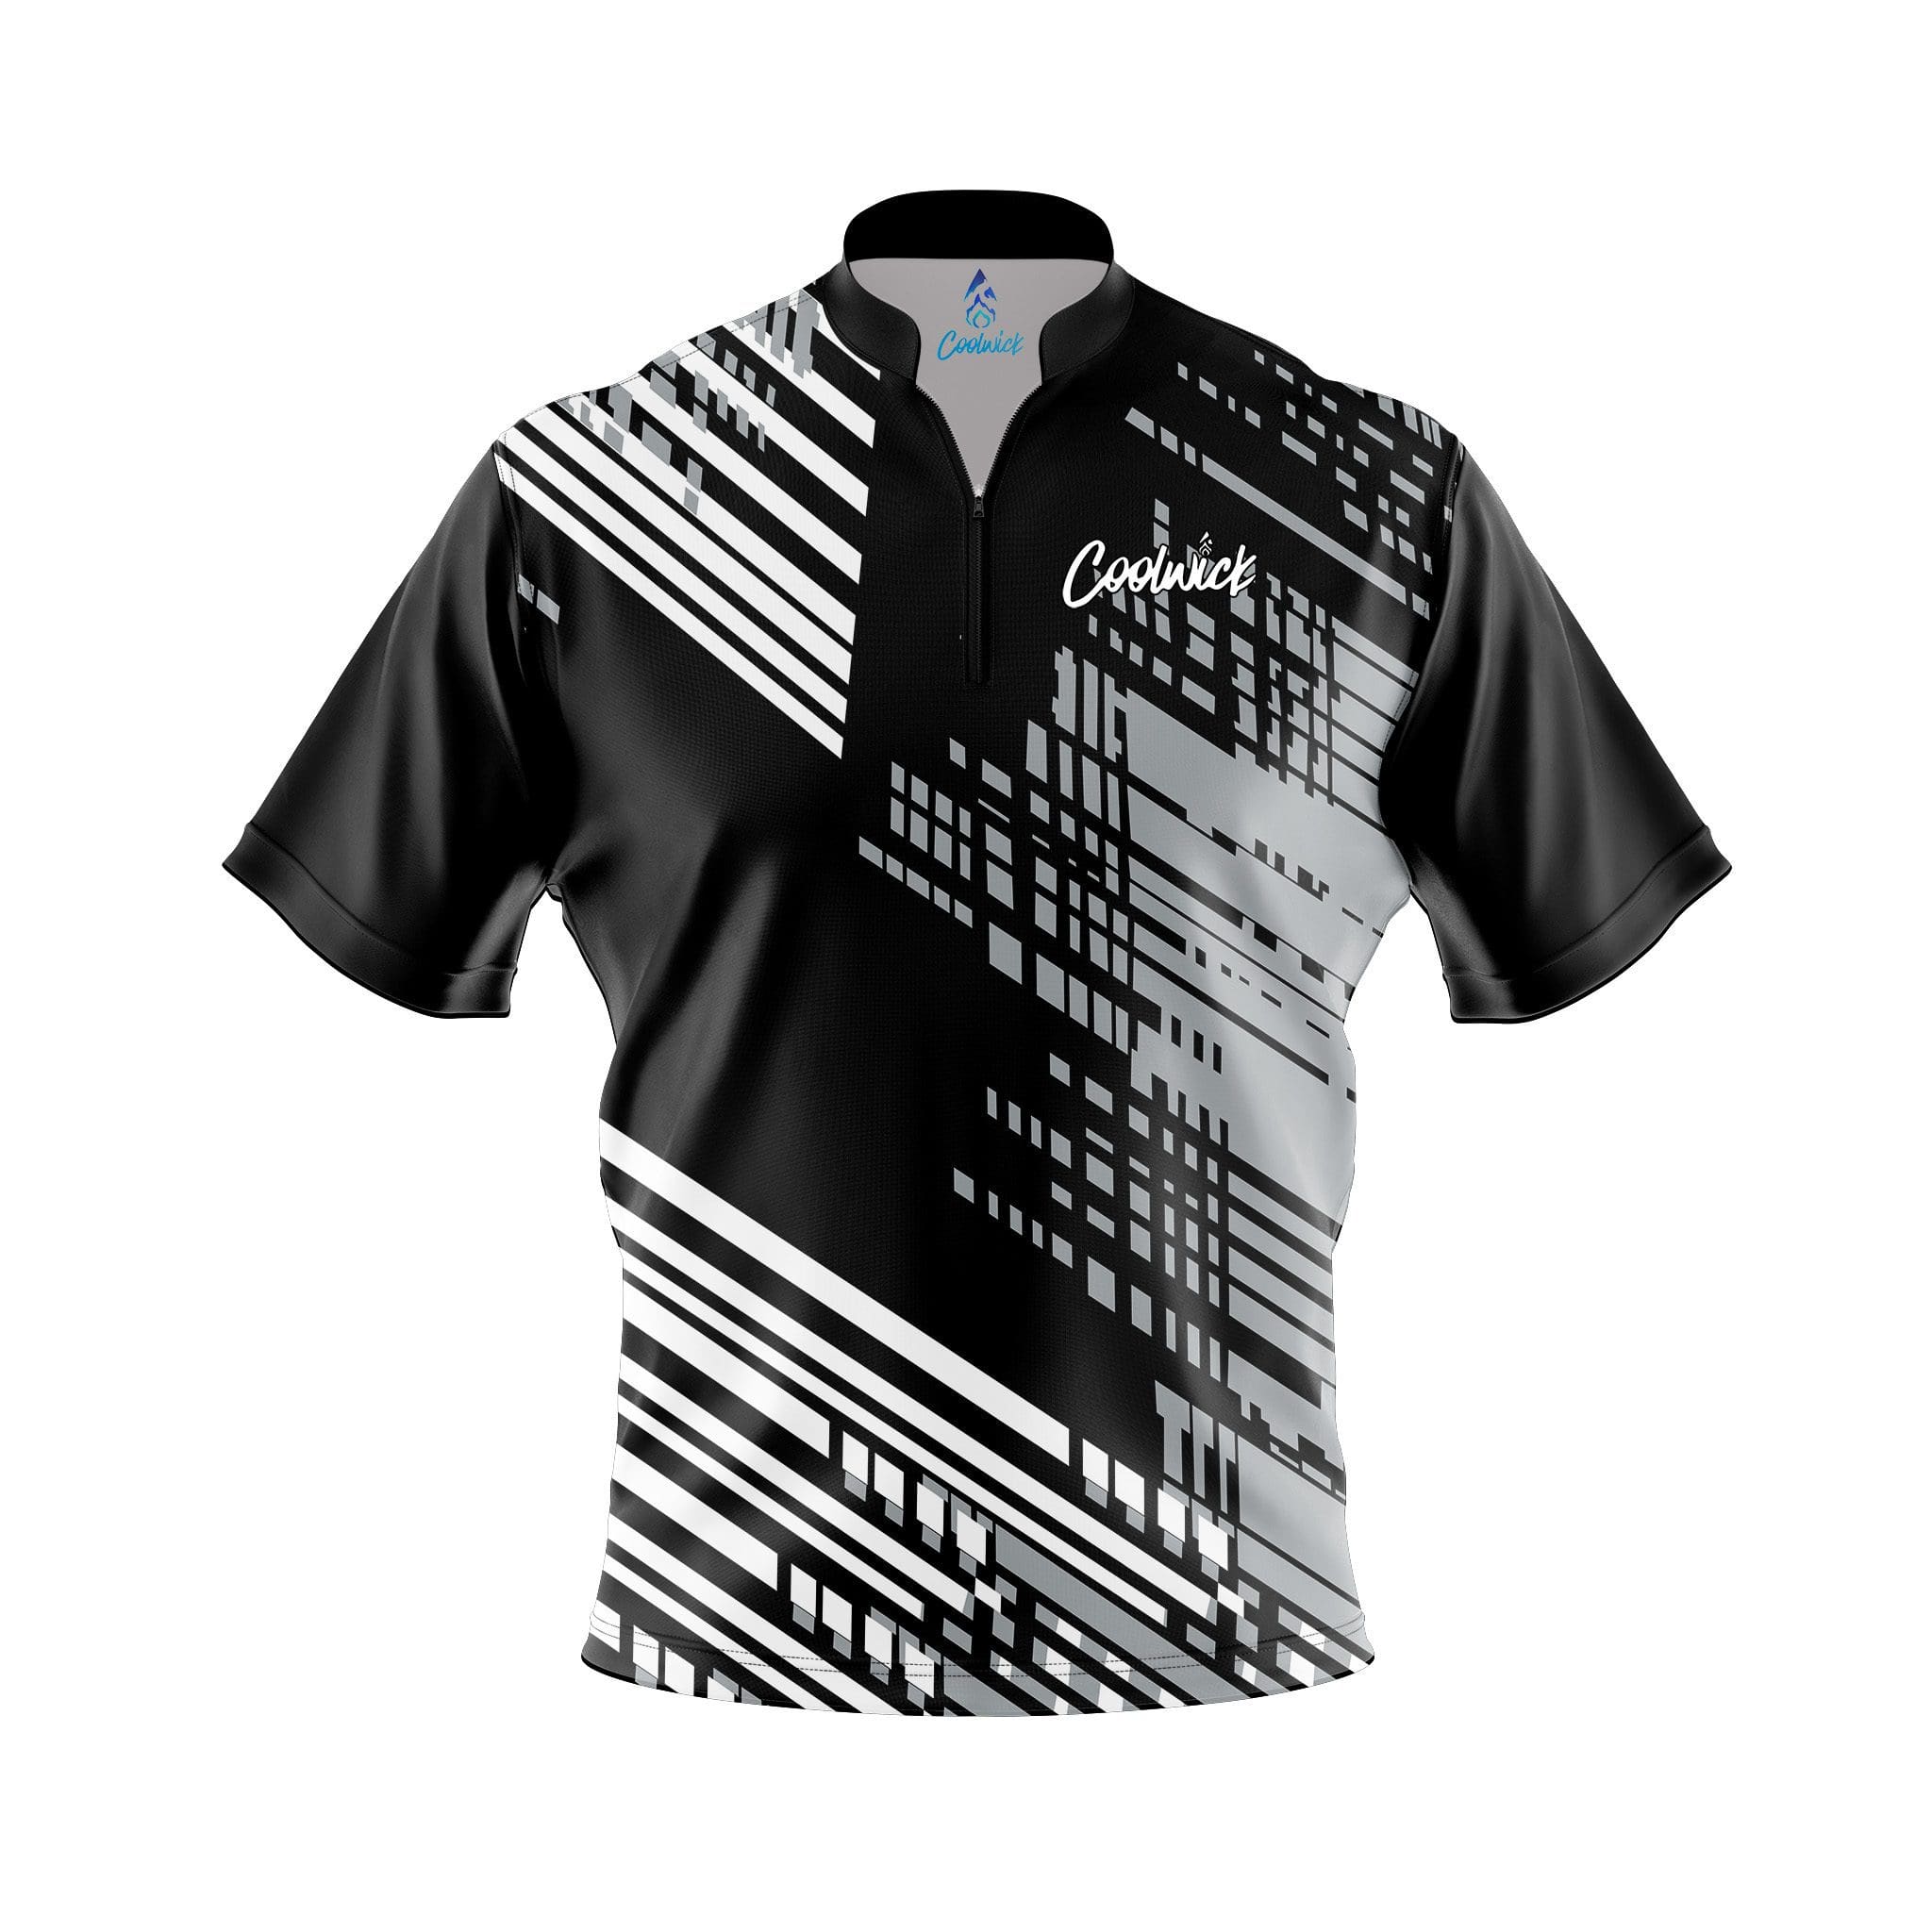 Storm Black and Gold Liquid Marble Quick Ship CoolWick Sash Zip Bowling Jersey | BowlersMart